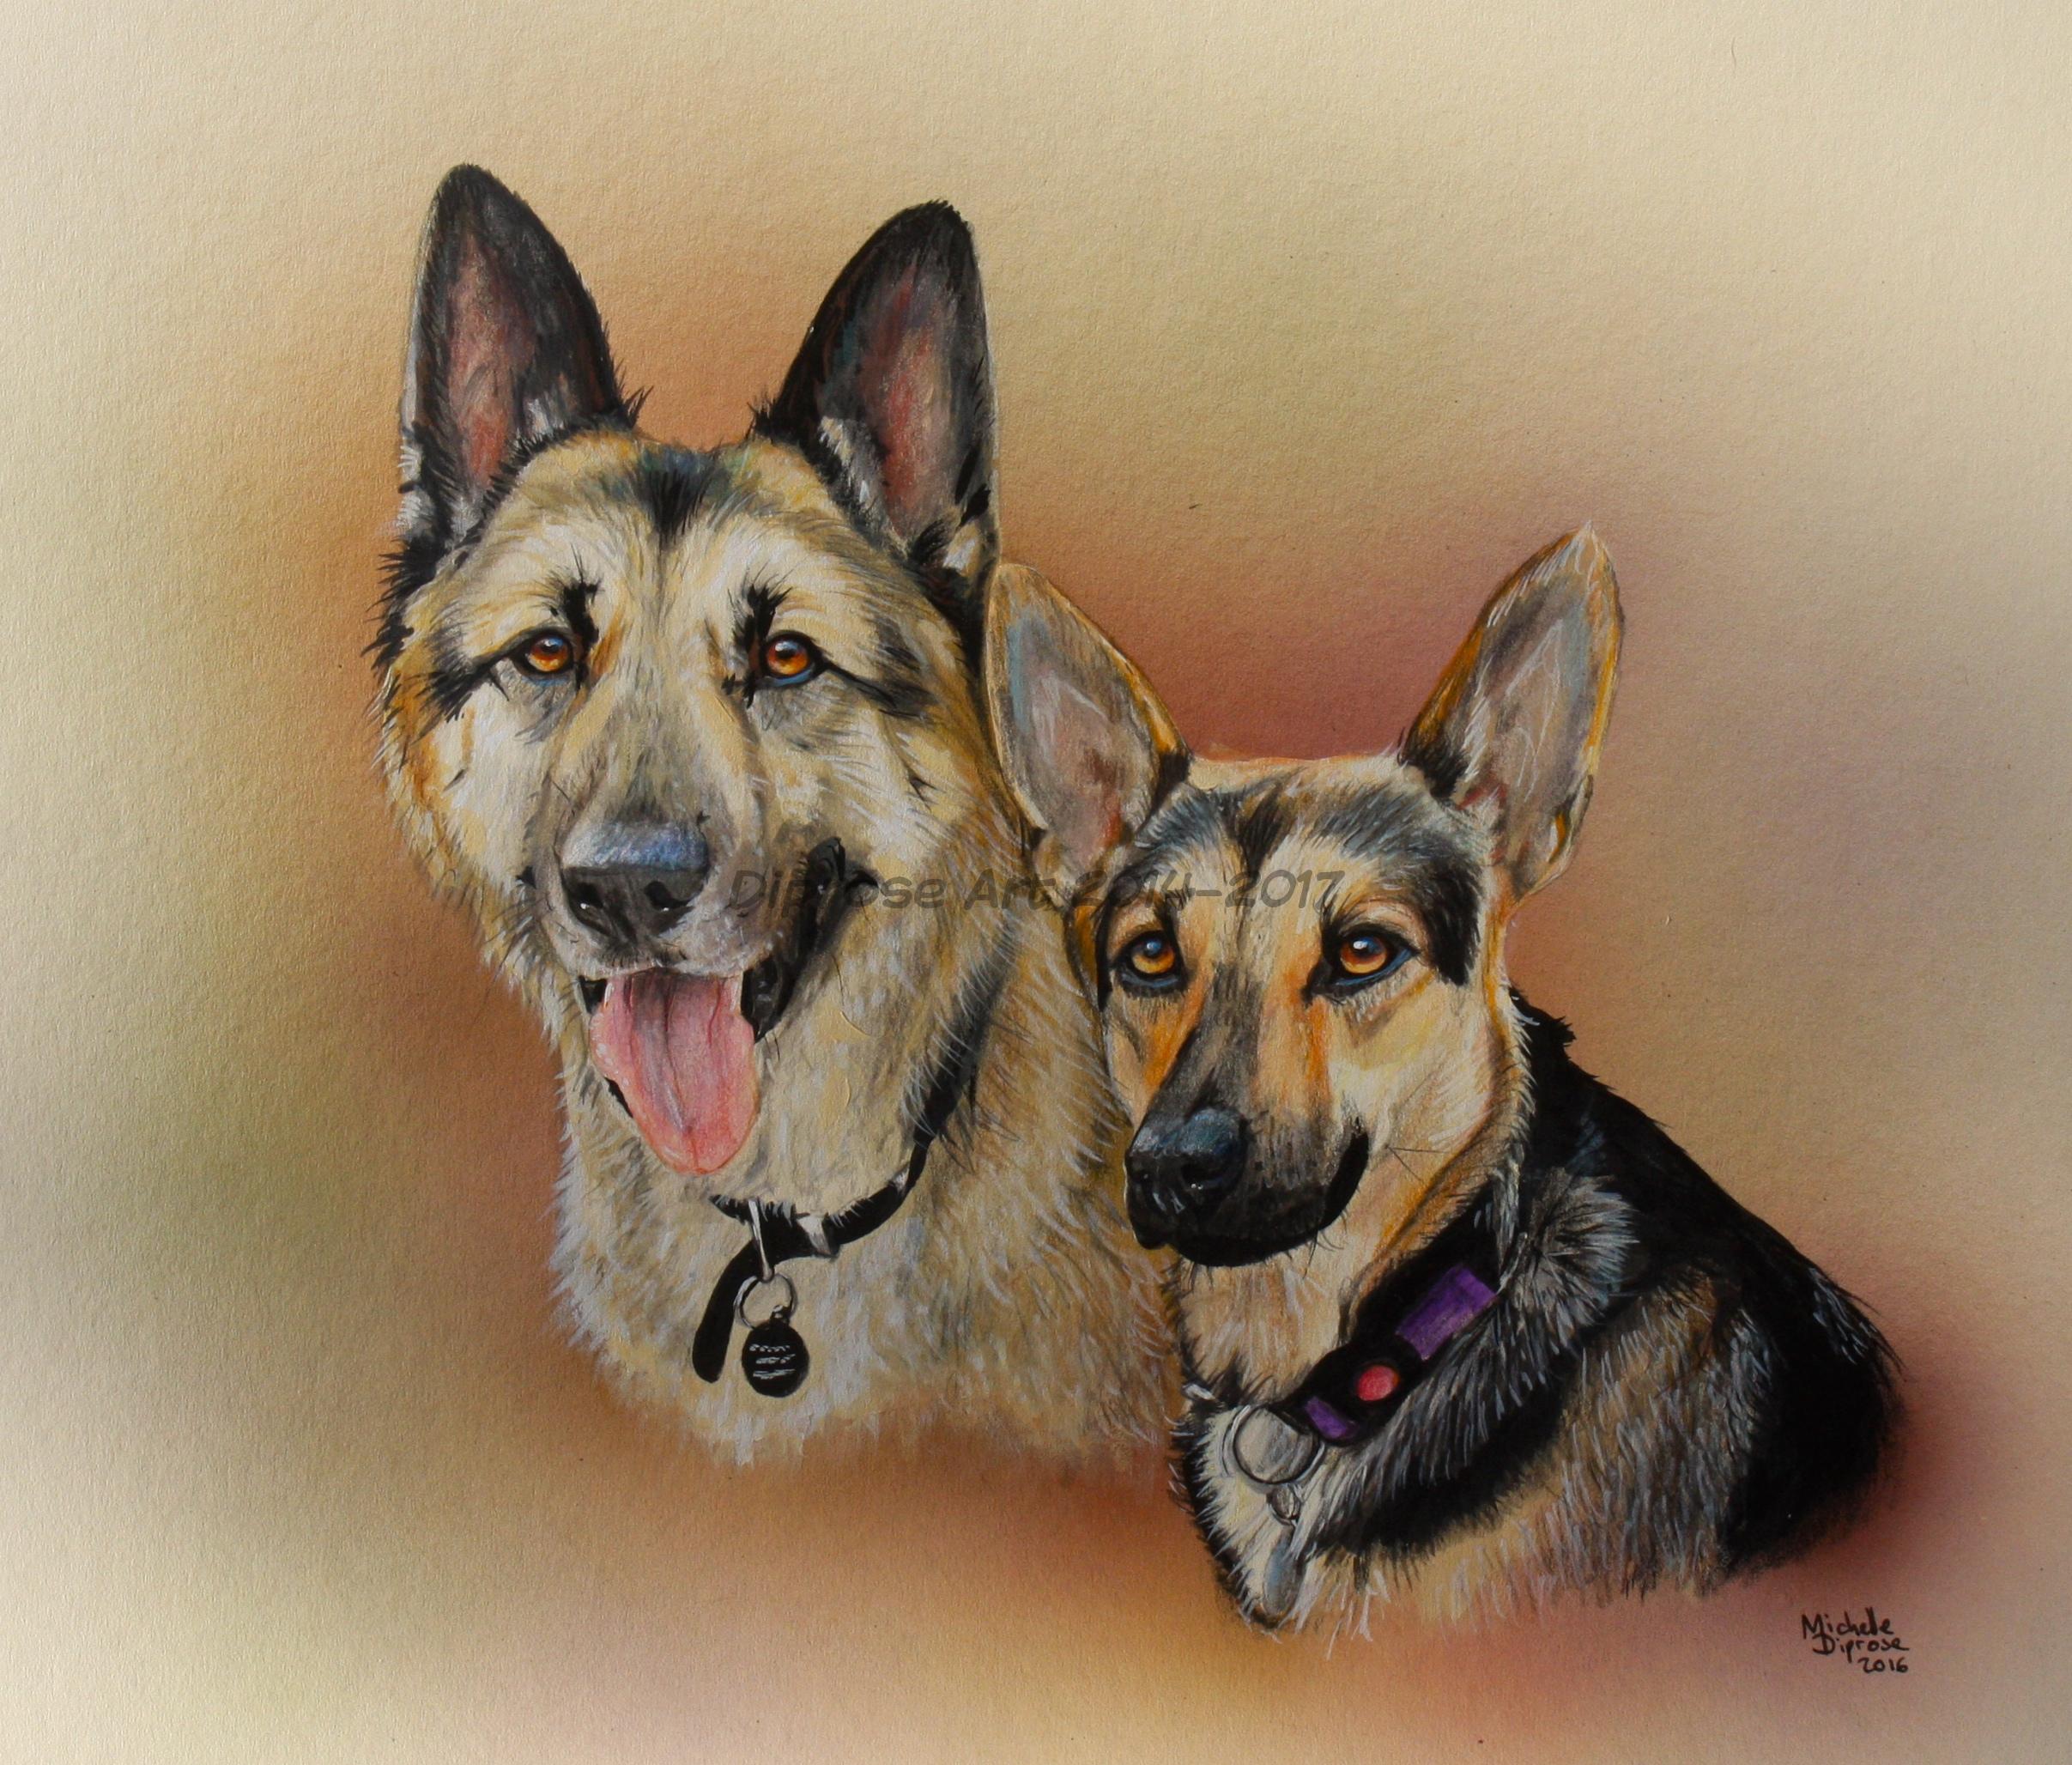 Acrylics on board - approx A3 - pet dog portraits - These two were done as a special Christmas present as their mum is poorly - so I hope her painting made her feel a little happier.